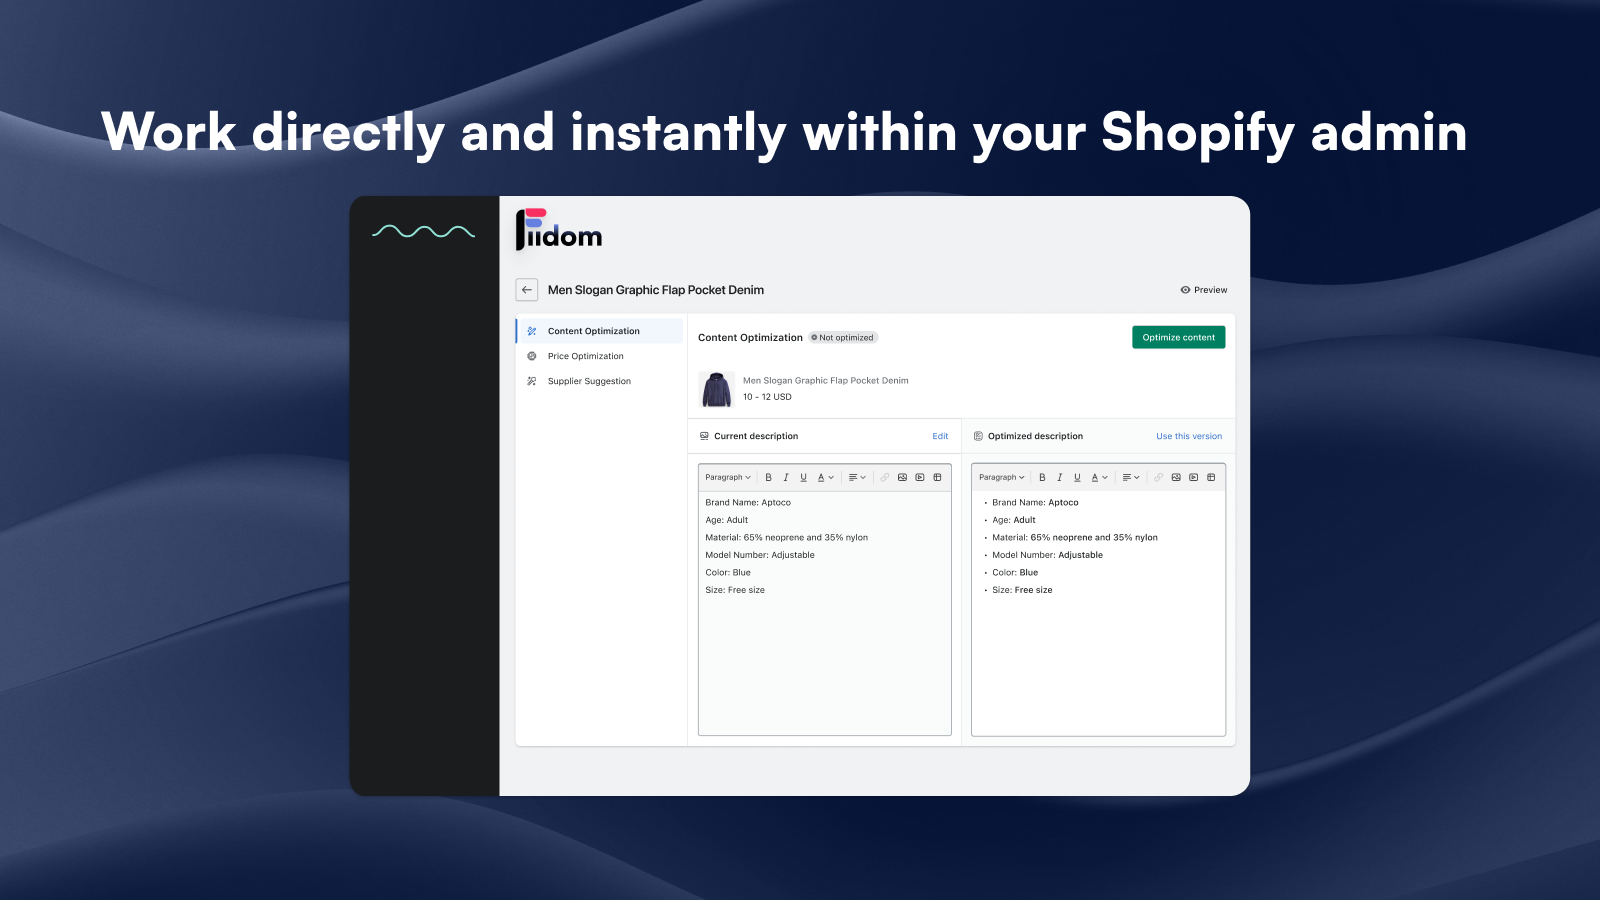 Work directly and instantly within your Shopify admin